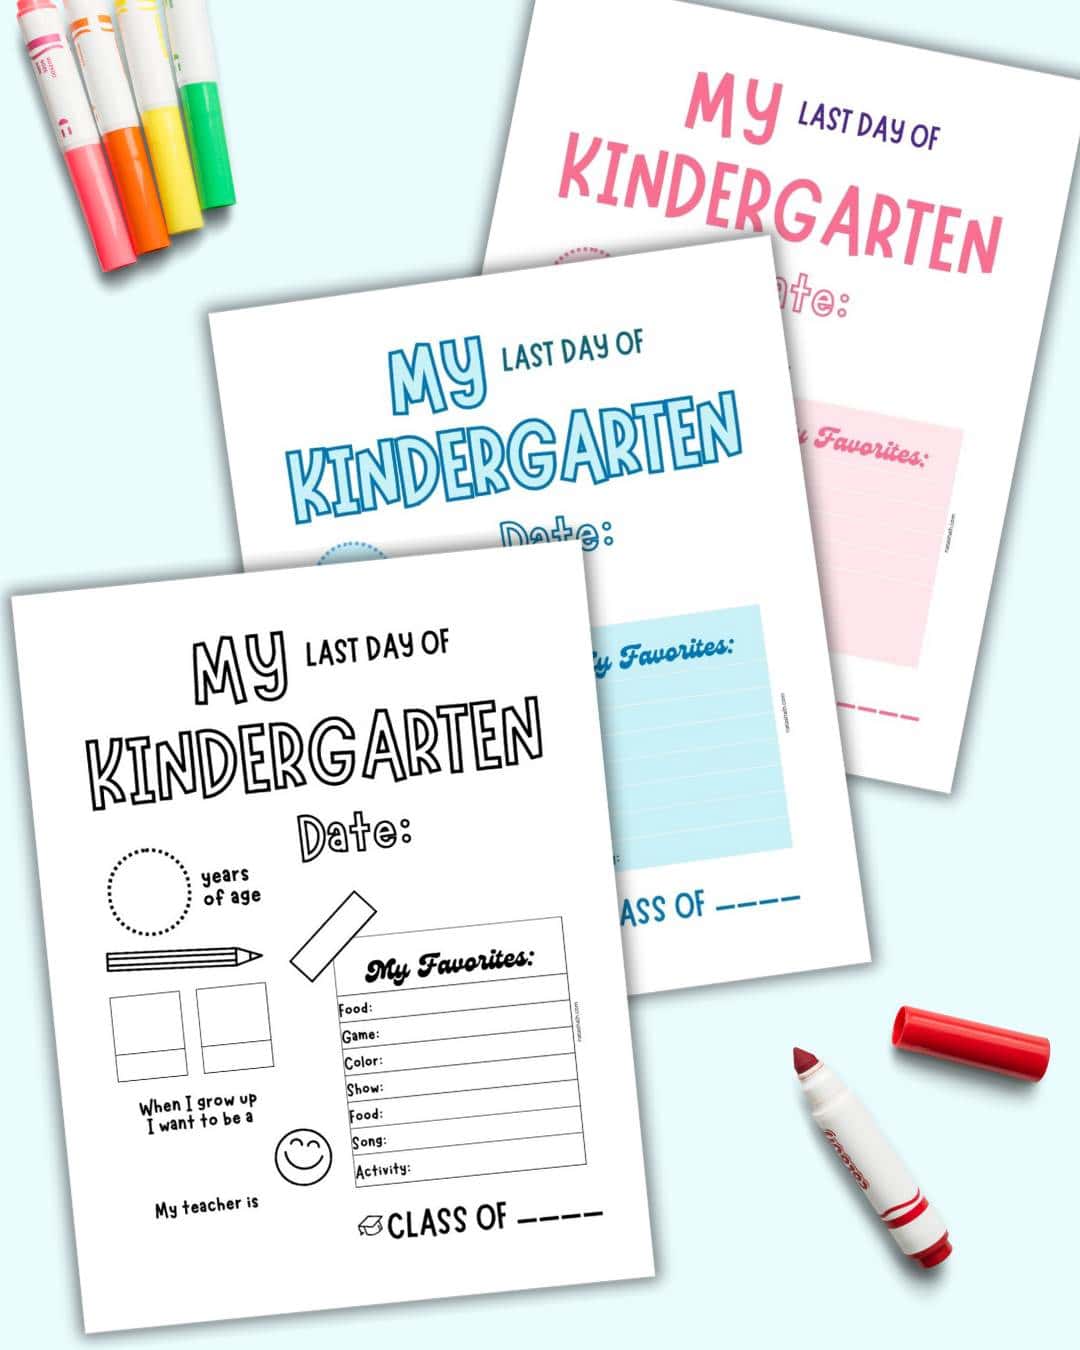 A preview of three pages of last day of kindergarten questionnaire. All pages are the same except for the color scheme. One is blue, one pink, and one black and white.